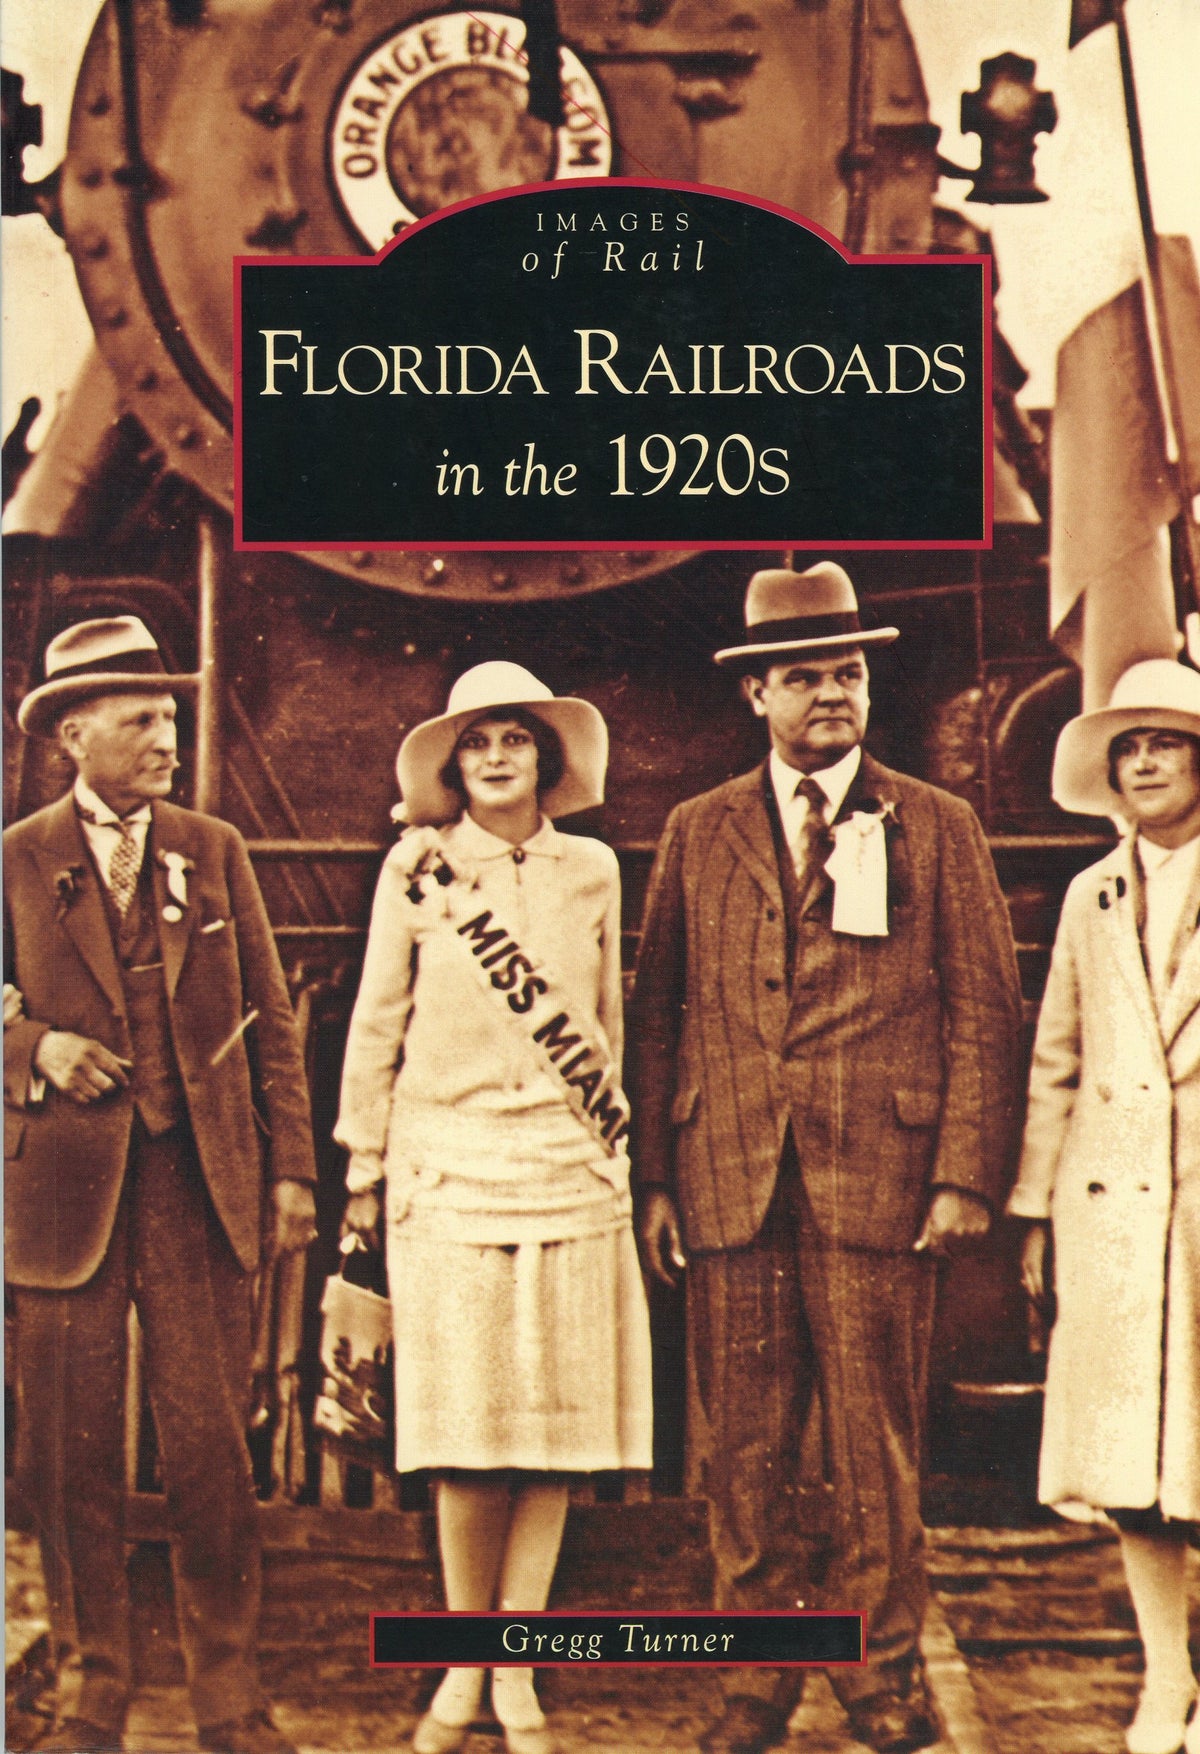 Images of Rail: Florida Railroads in the 1920's